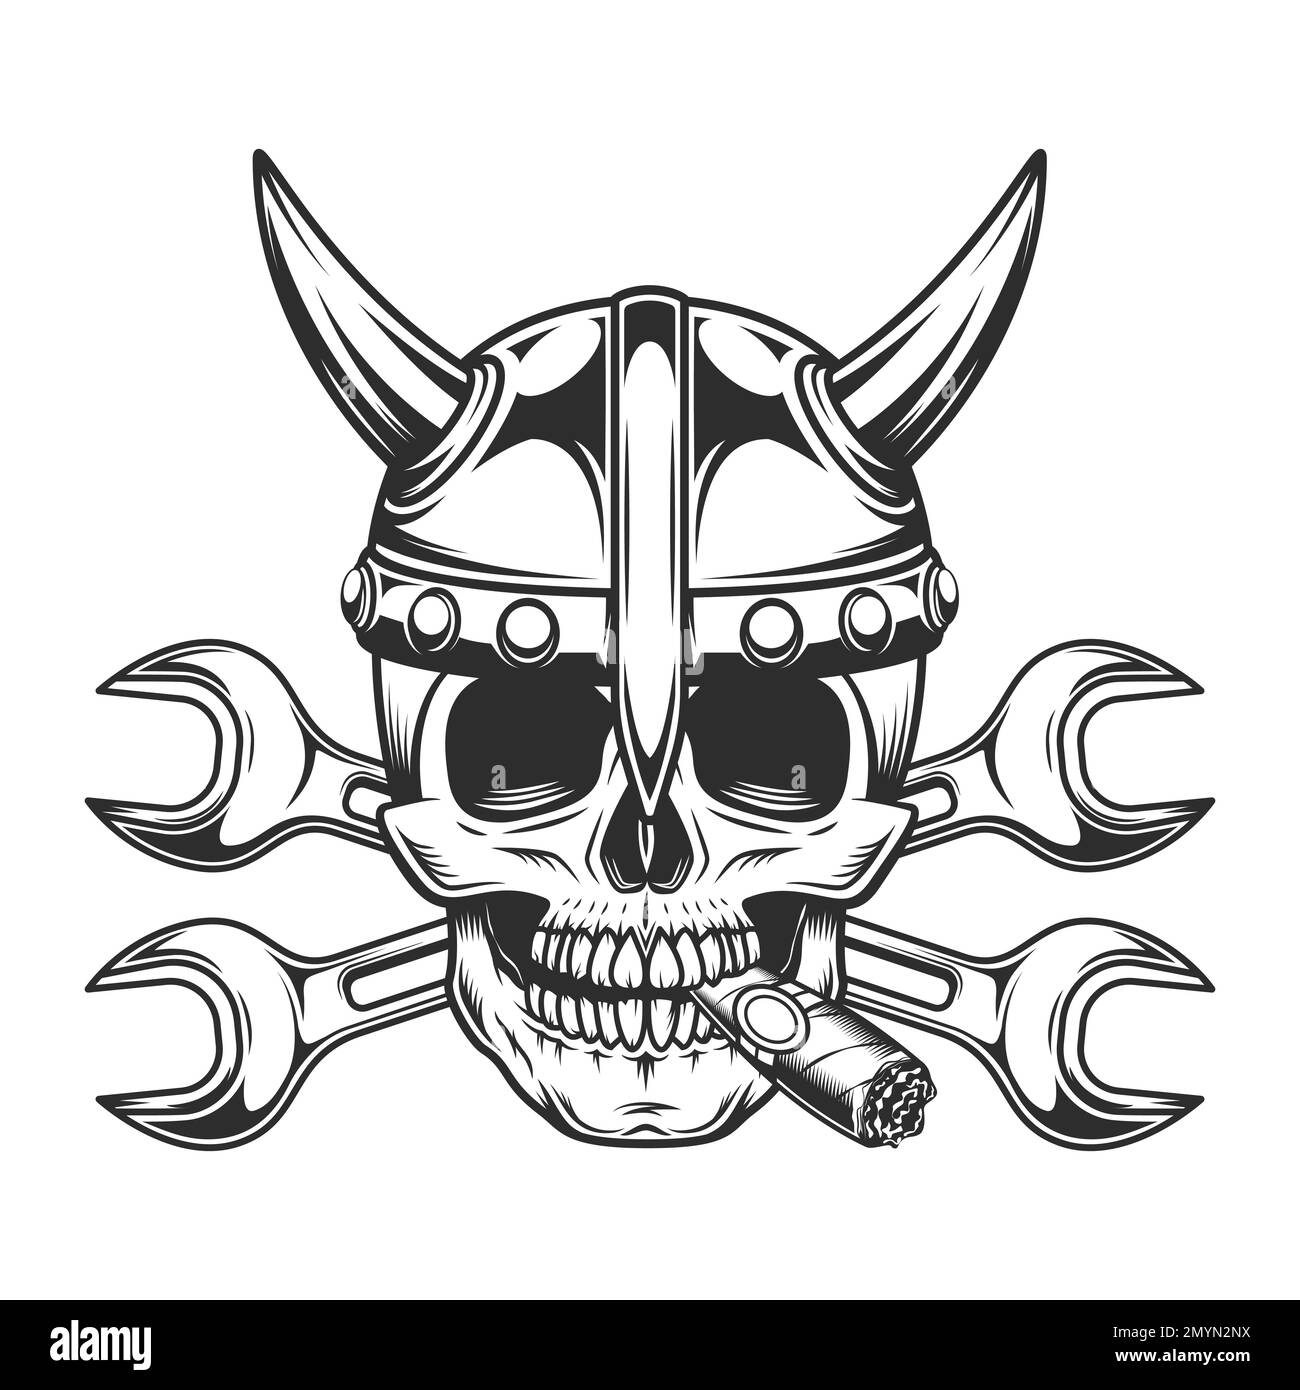 Vintage viking skull smoking cigar or cigarette smoke in horned helmet with body shop service car and truck mechanic repair tool crossed wrench Stock Vector